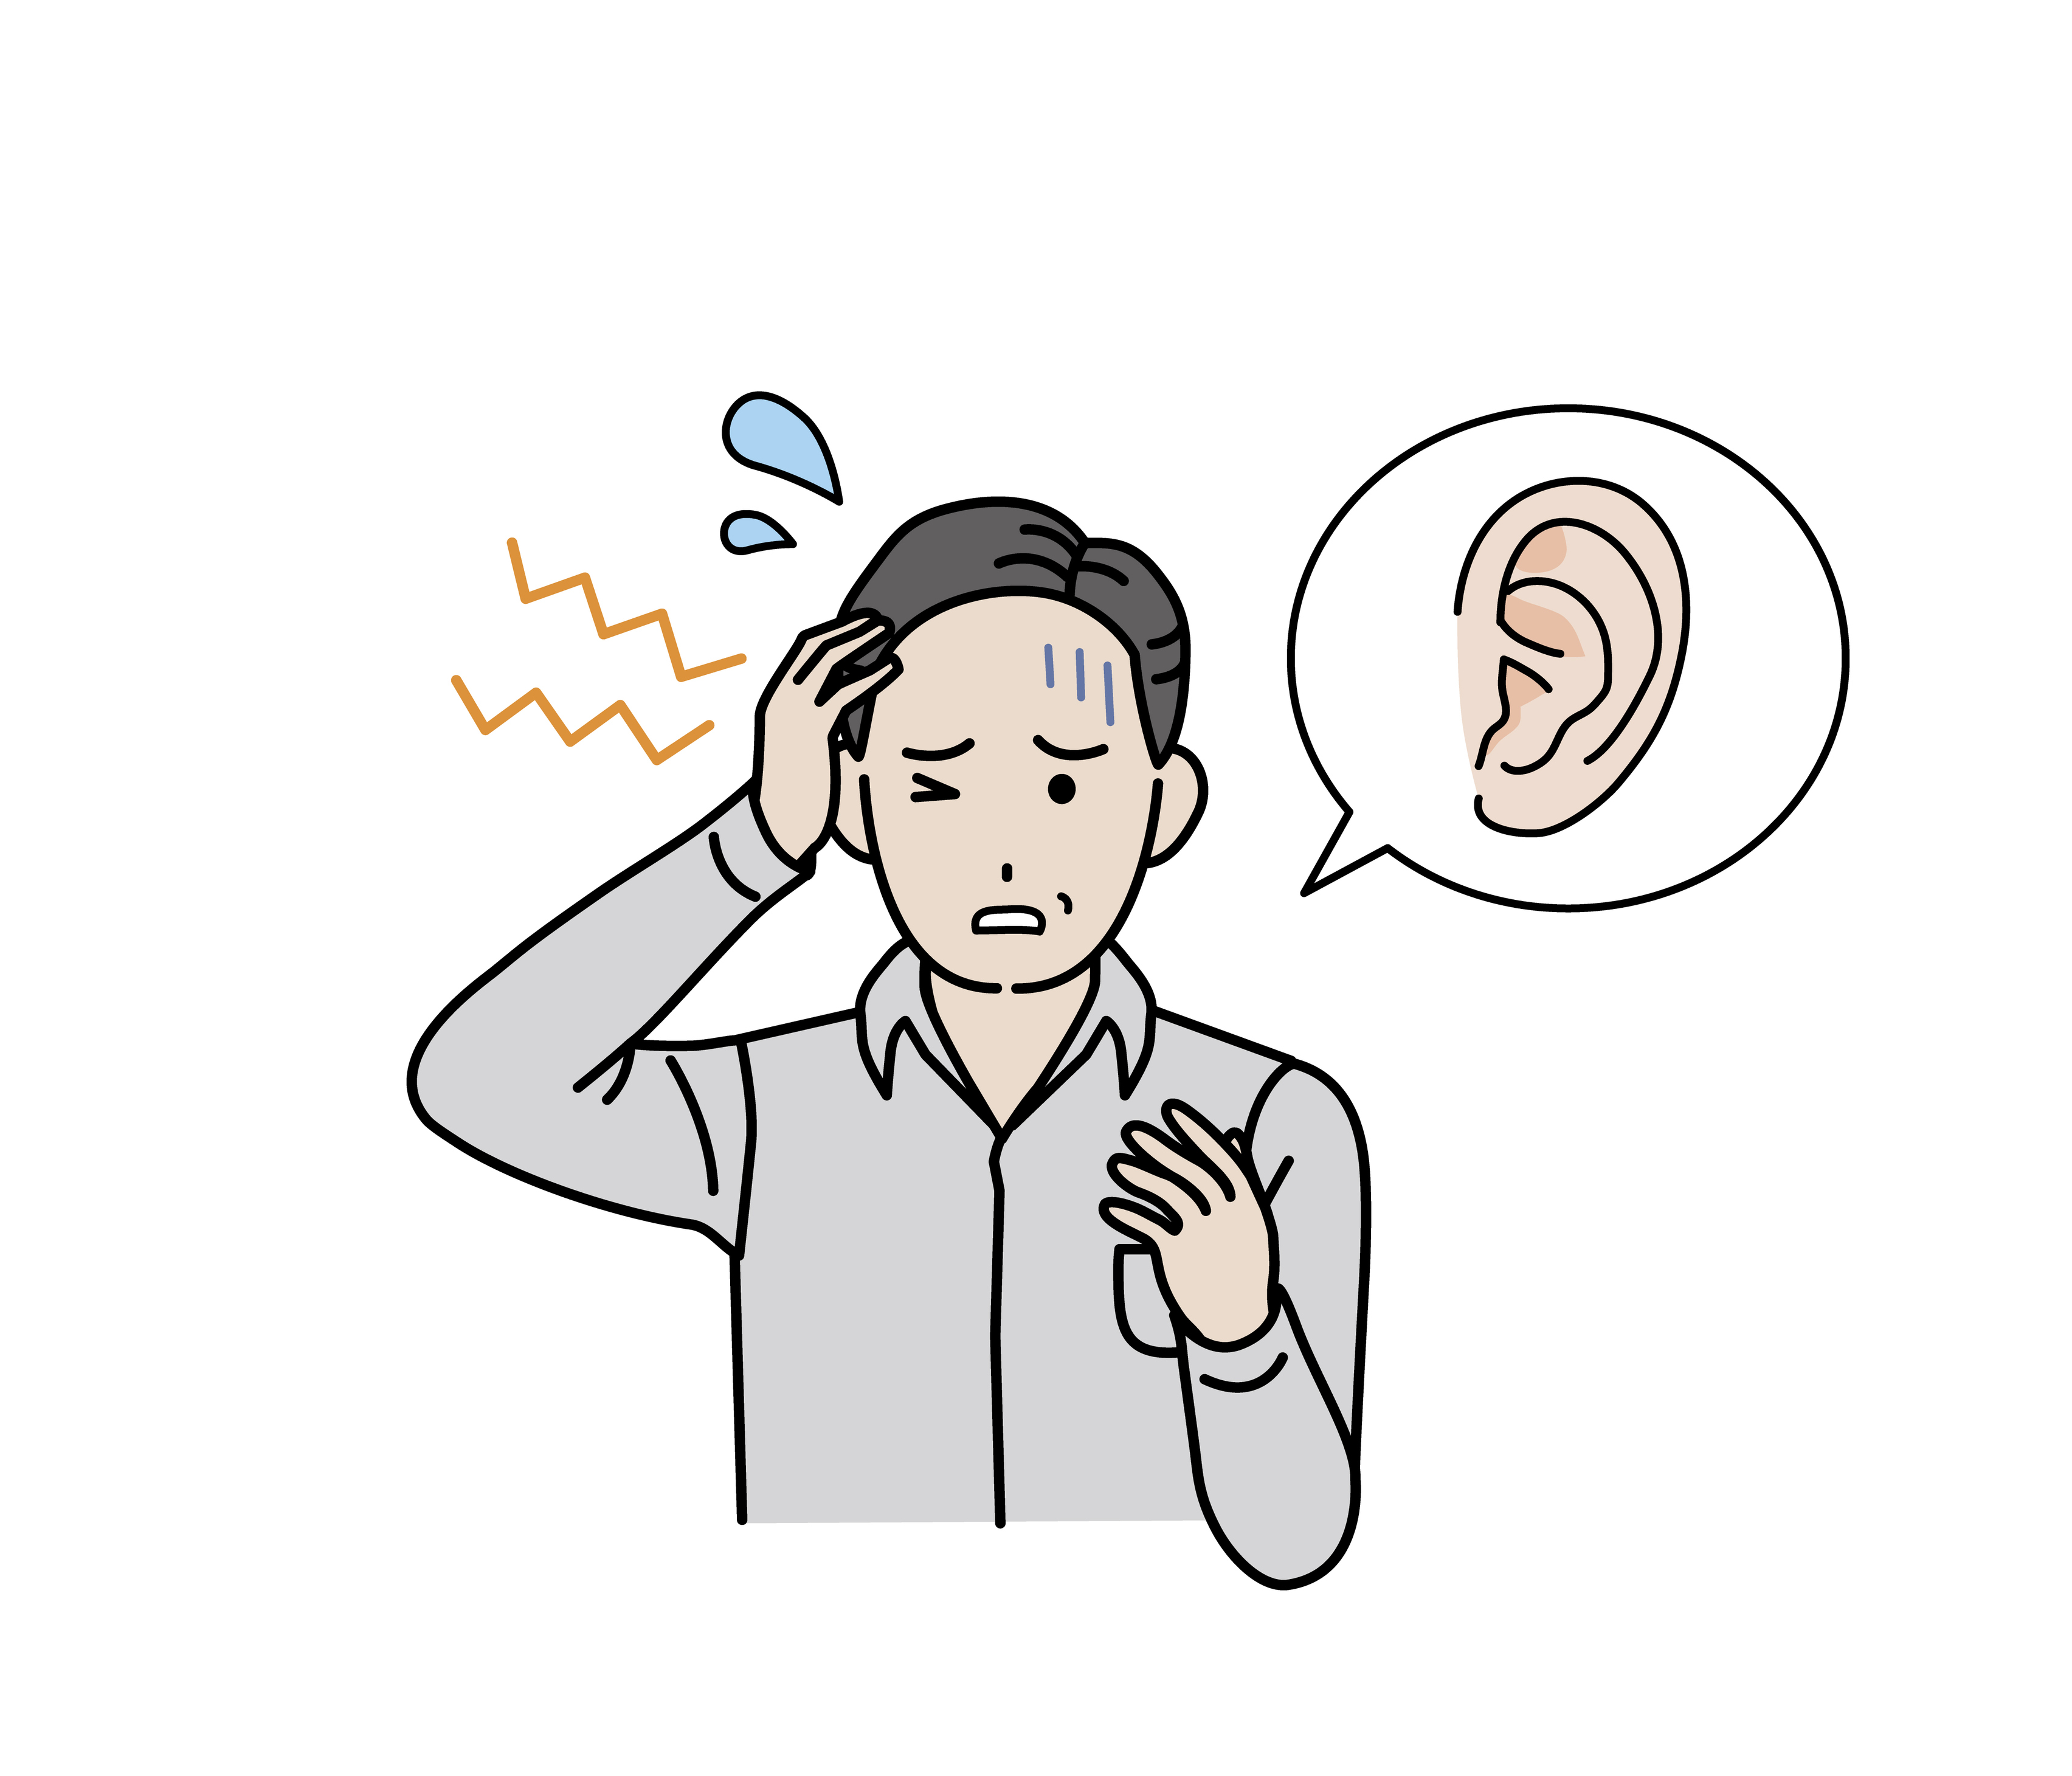 Tinnitus Distress Webinar, Constant Ringing in Ears, Anxiety, CBT Treatment